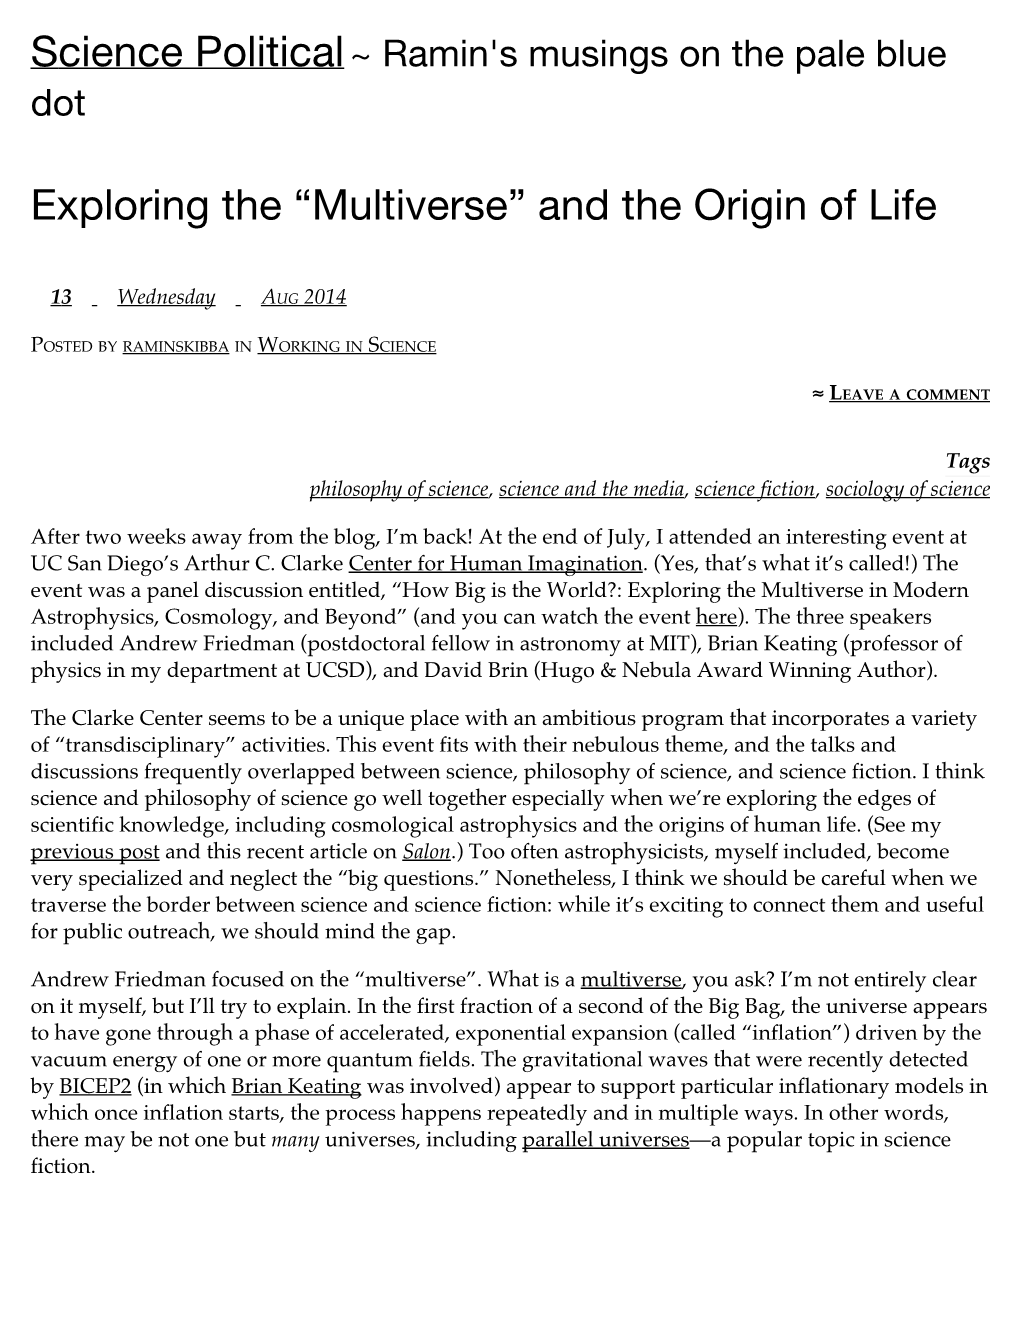 Exploring the “Multiverse” and the Origin of Life | Science Political